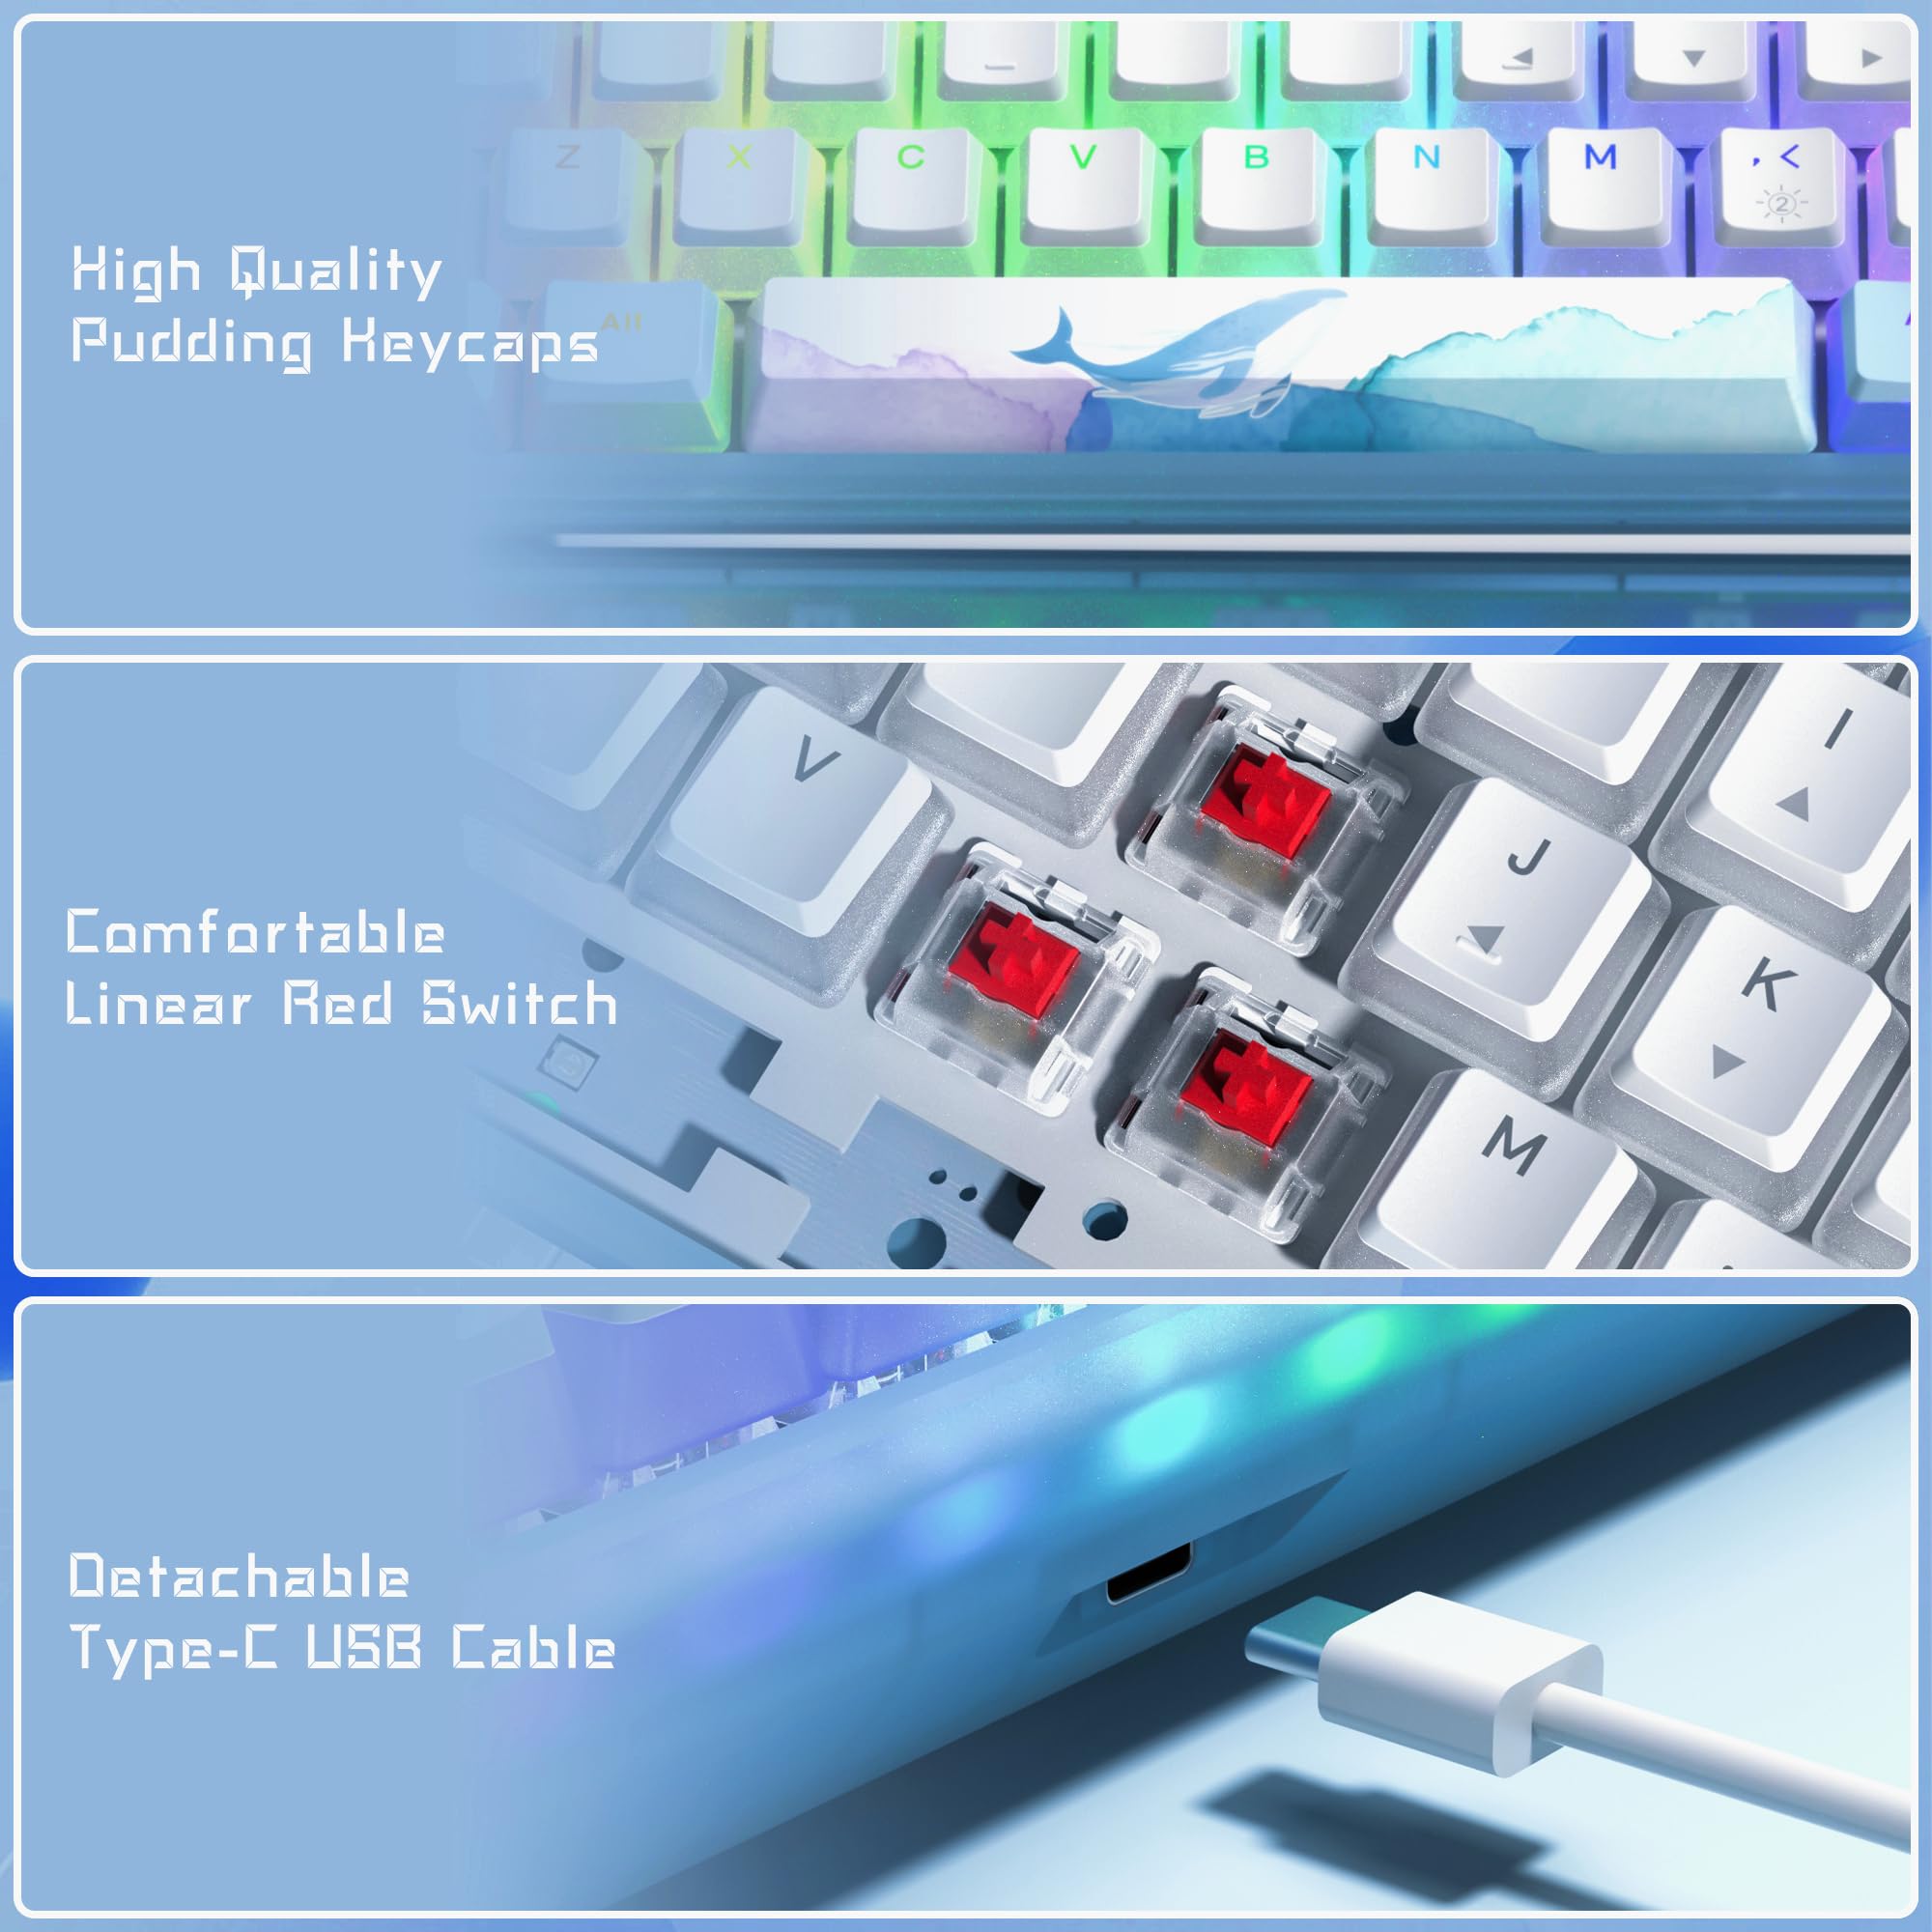 Womier WK61 60% Keyboard, Hot-Swappable Keyboard Ultra-Compact RGB Gaming Mechanical Keyboard w/Pudding Keycaps, Linear Red Switch, Pro Driver/Software Supported - Glacier Blue